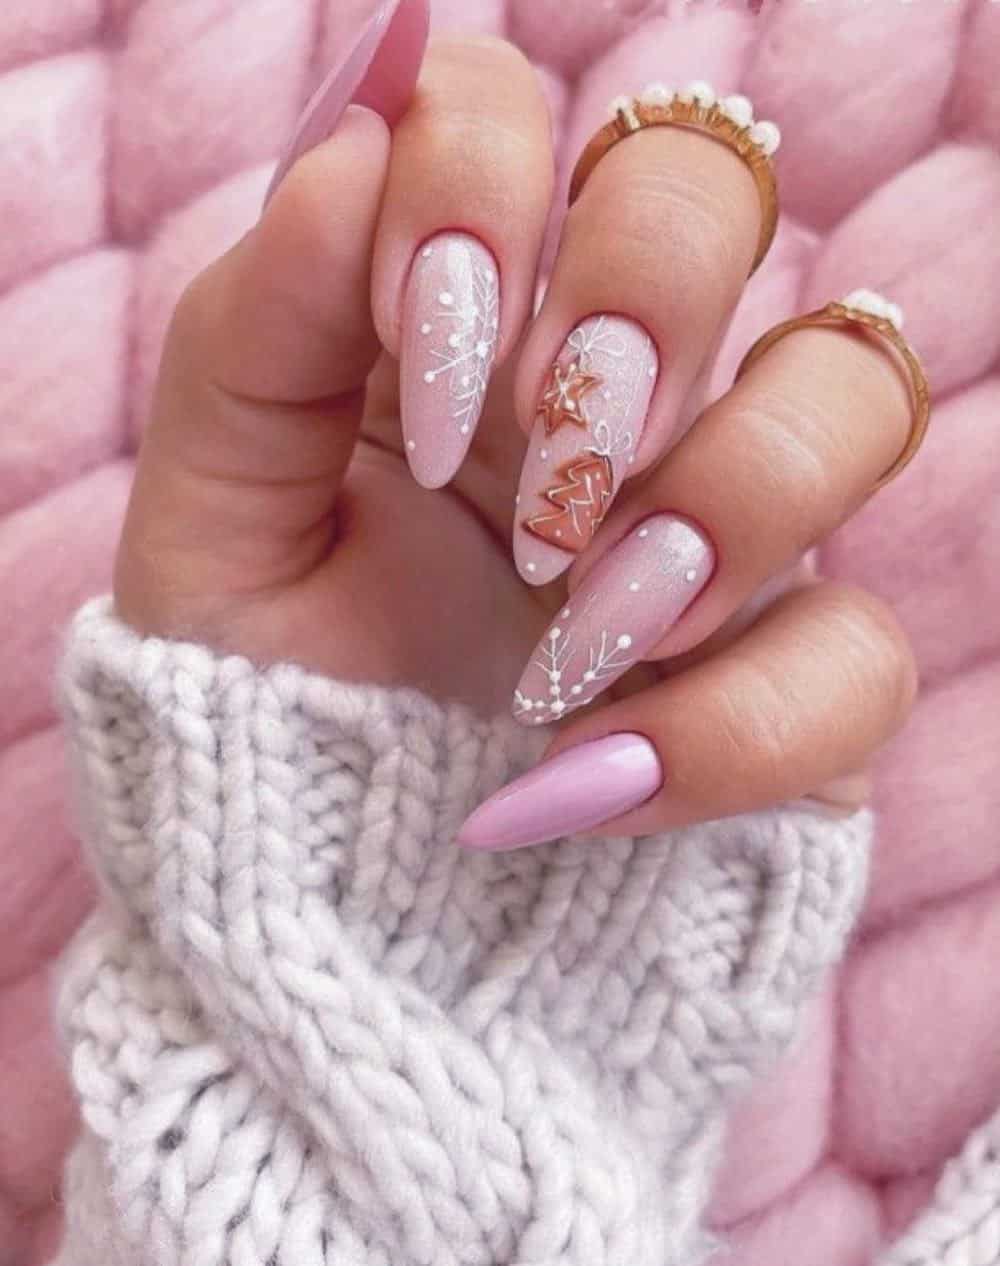 A hand with long almond nails painted with glossy light pink polish and sparkly pink polish, featuring white snowflakes and gingerbread cookie nails art